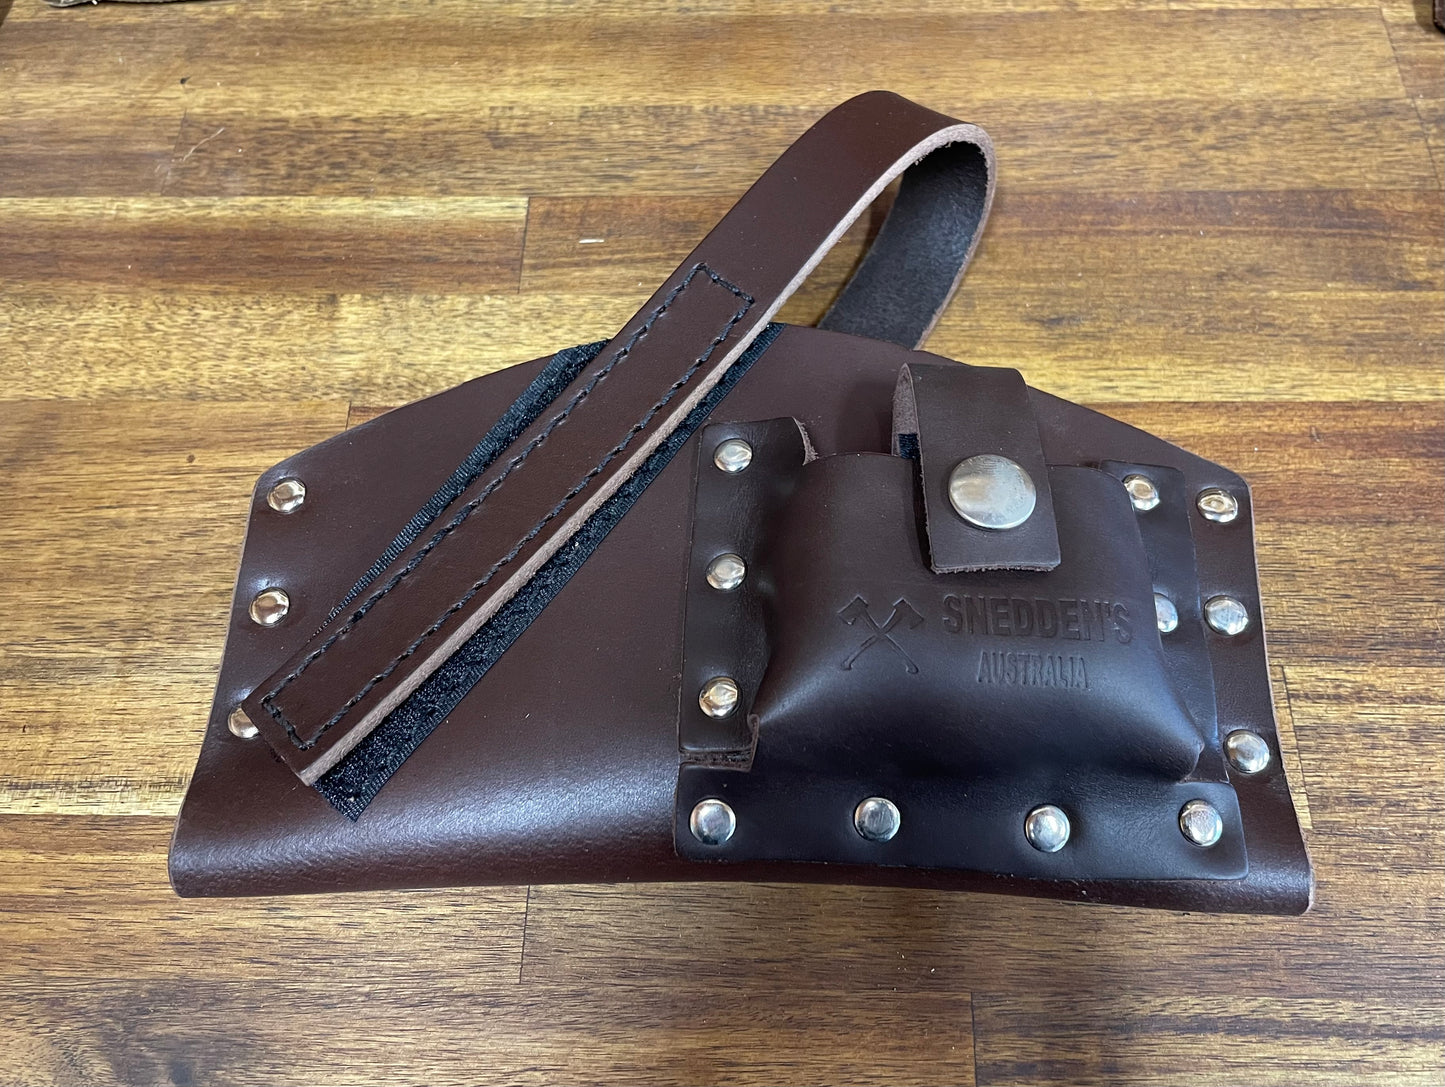 Knockabout / Race Axe Cover with sharpening stone pouch - BROWN Leather